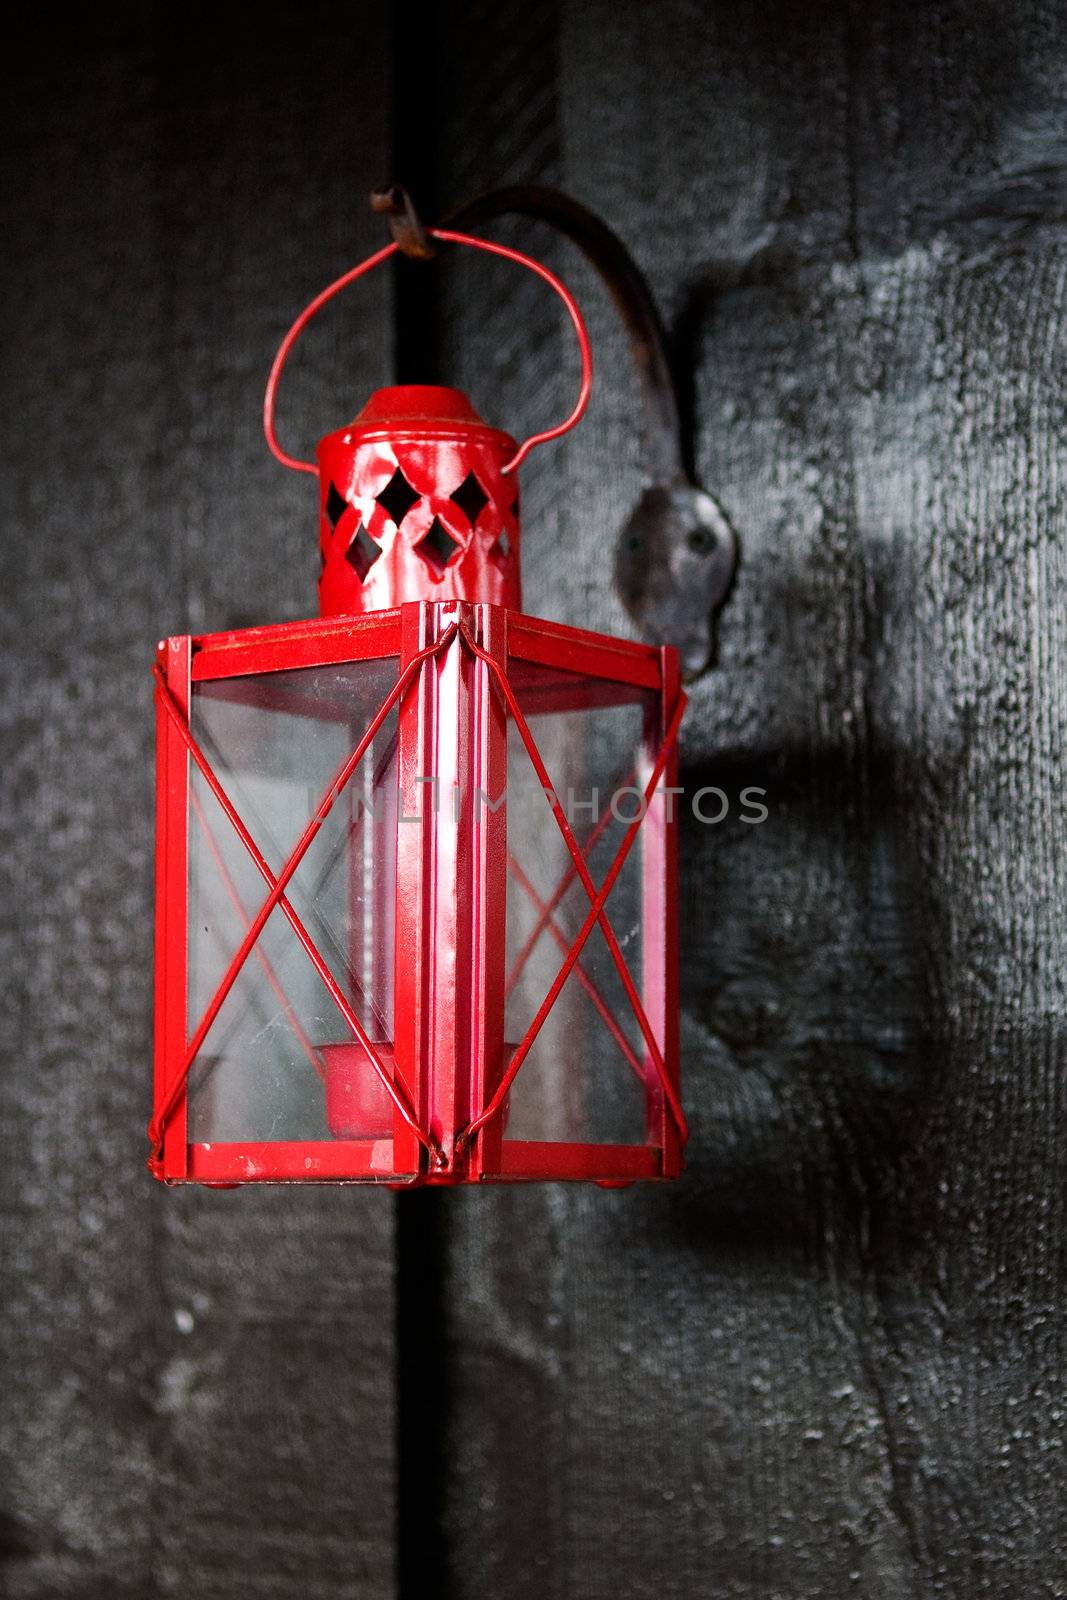 An old camping lantern for a tea light